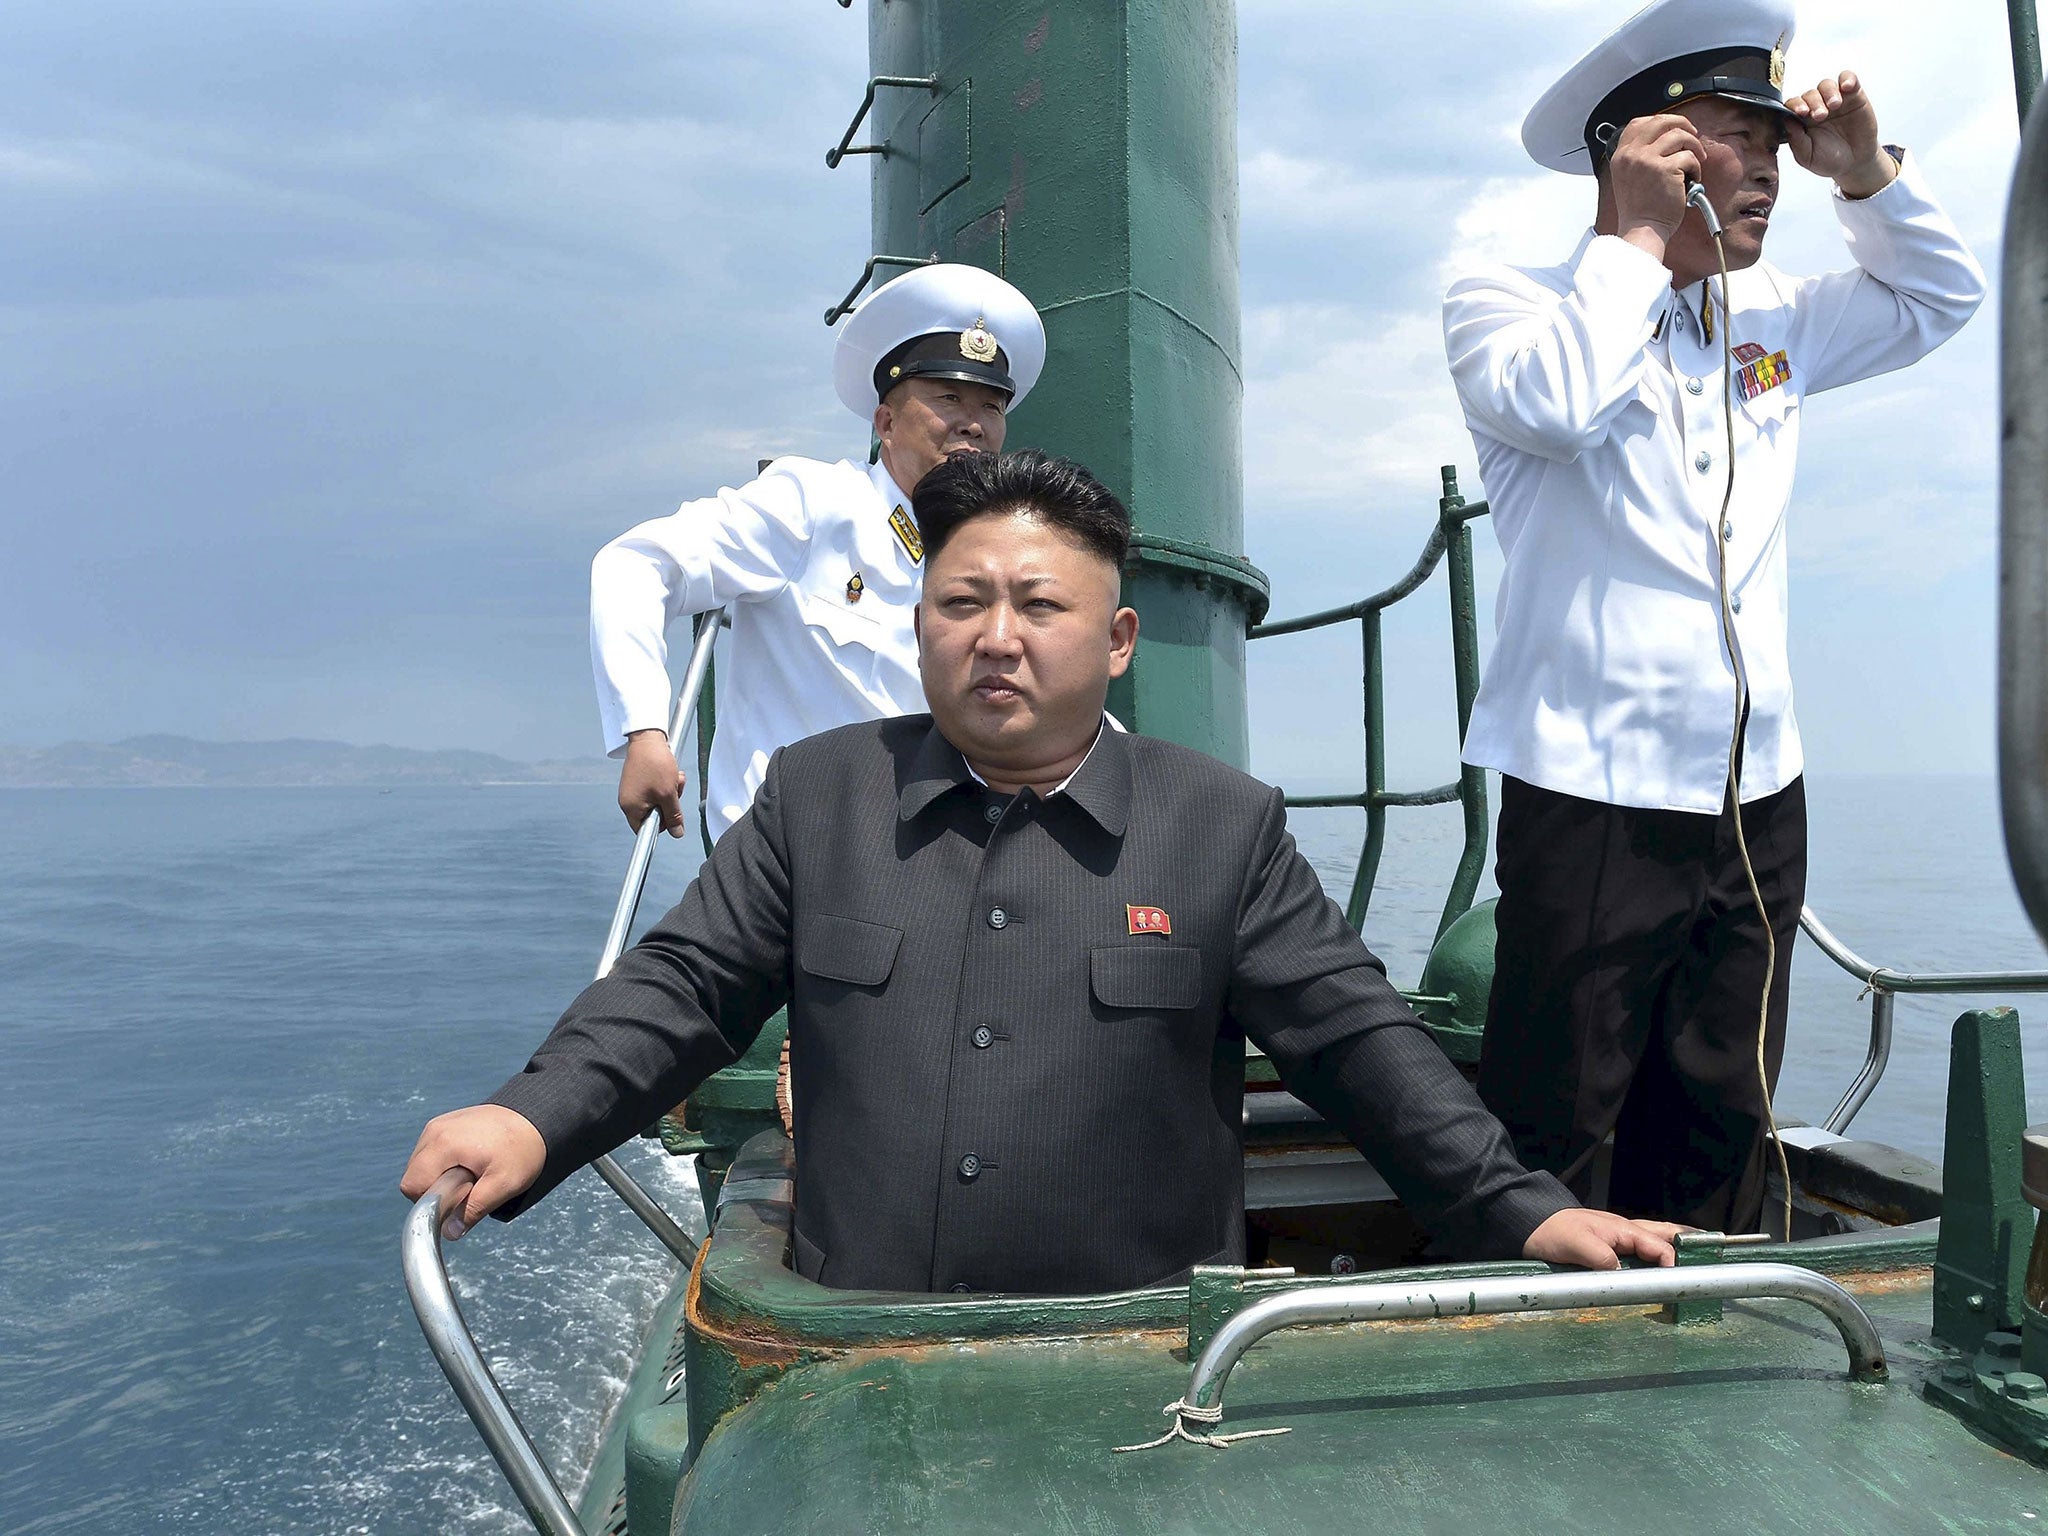 Pyongyang reportedly conducted an ejection test of the submarine-launched ballistic missile in December